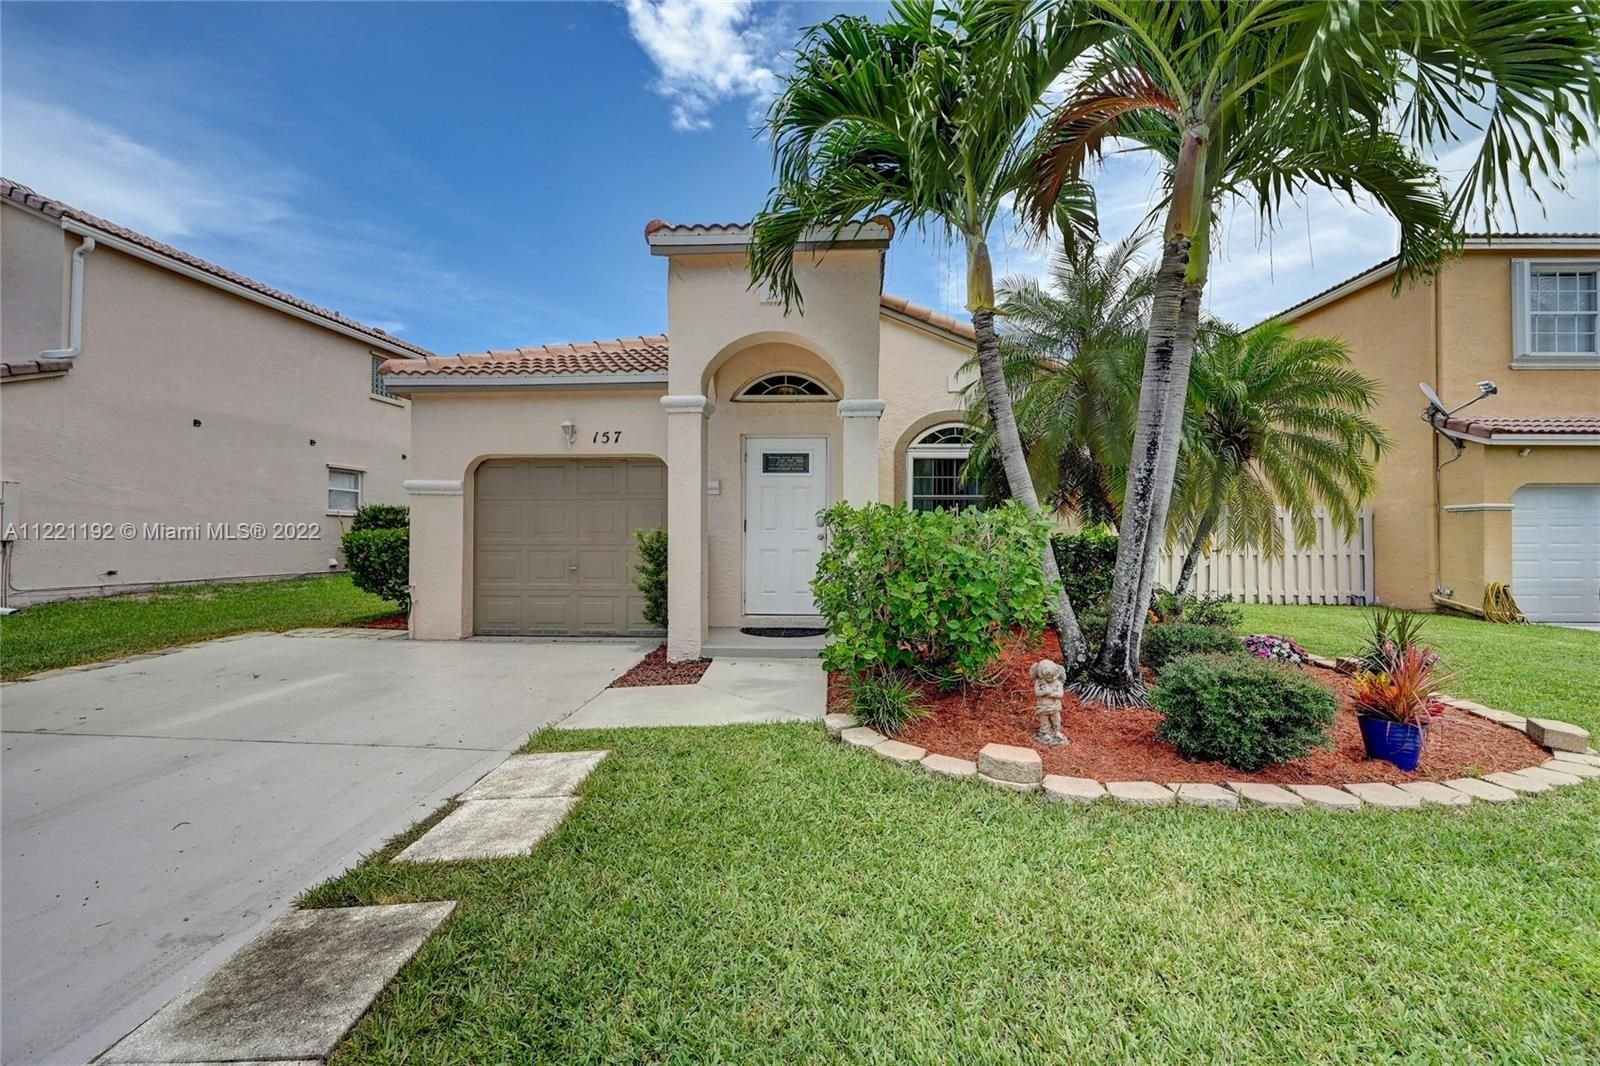 Real estate property located at 157 152nd Ave, Broward County, Pembroke Pines, FL